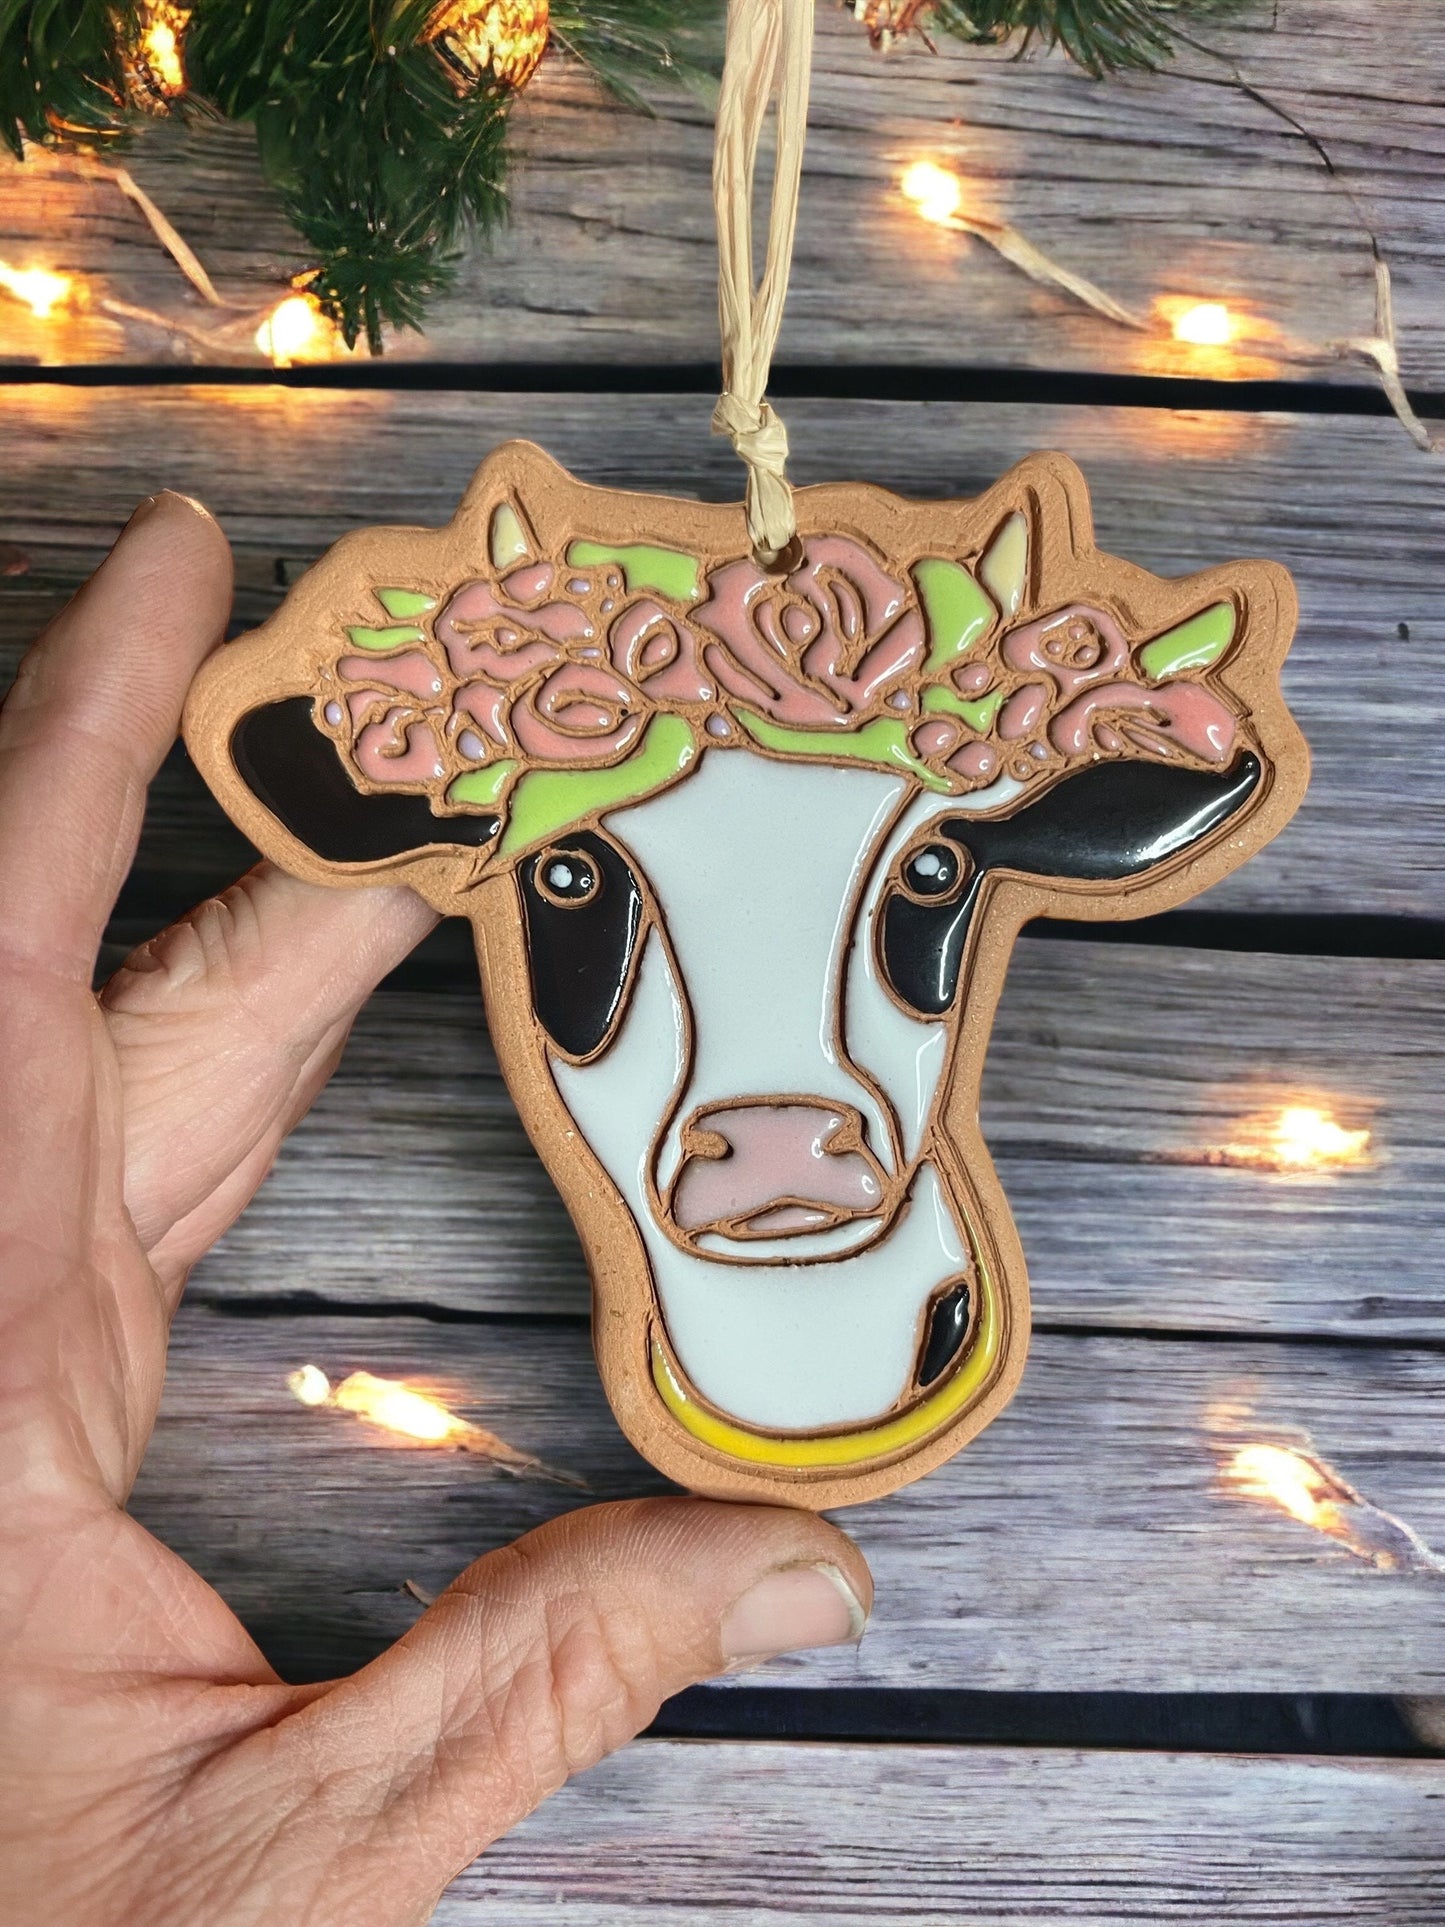 Cow with Rose Crown Ornament